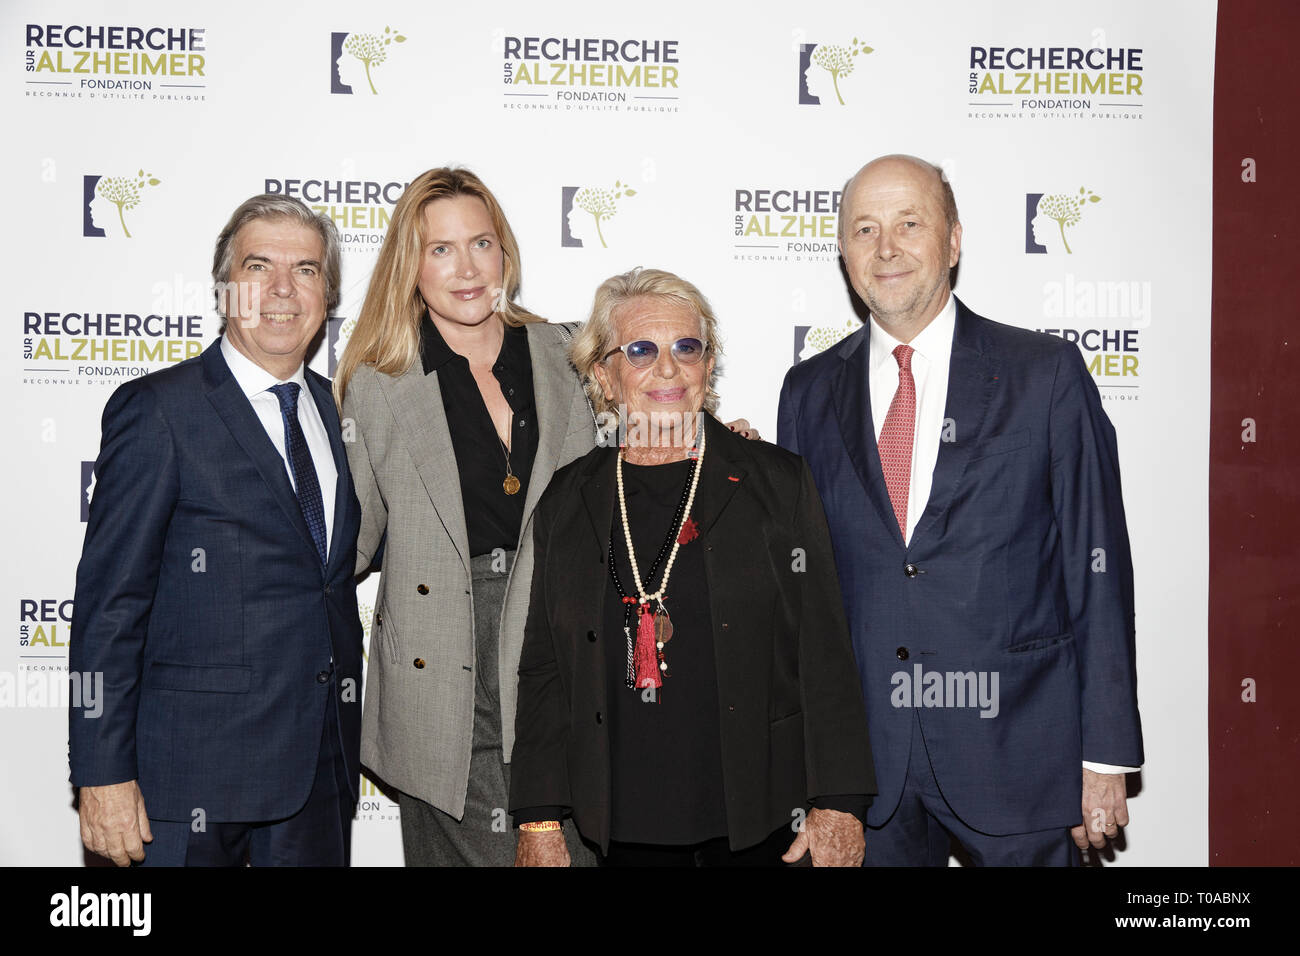 Paris, France. 18th Mar 2019. Pr Bruno Dubois(L), a guest, Veronique de Villele and Olivier De Ladoucette(R) - Photocall of the 14th Gala 2019 of the Association for Alzheimer Research at the Olympia in Paris on March 18, 2019 Credit: Véronique PHITOUSSI/Alamy Live News Stock Photo